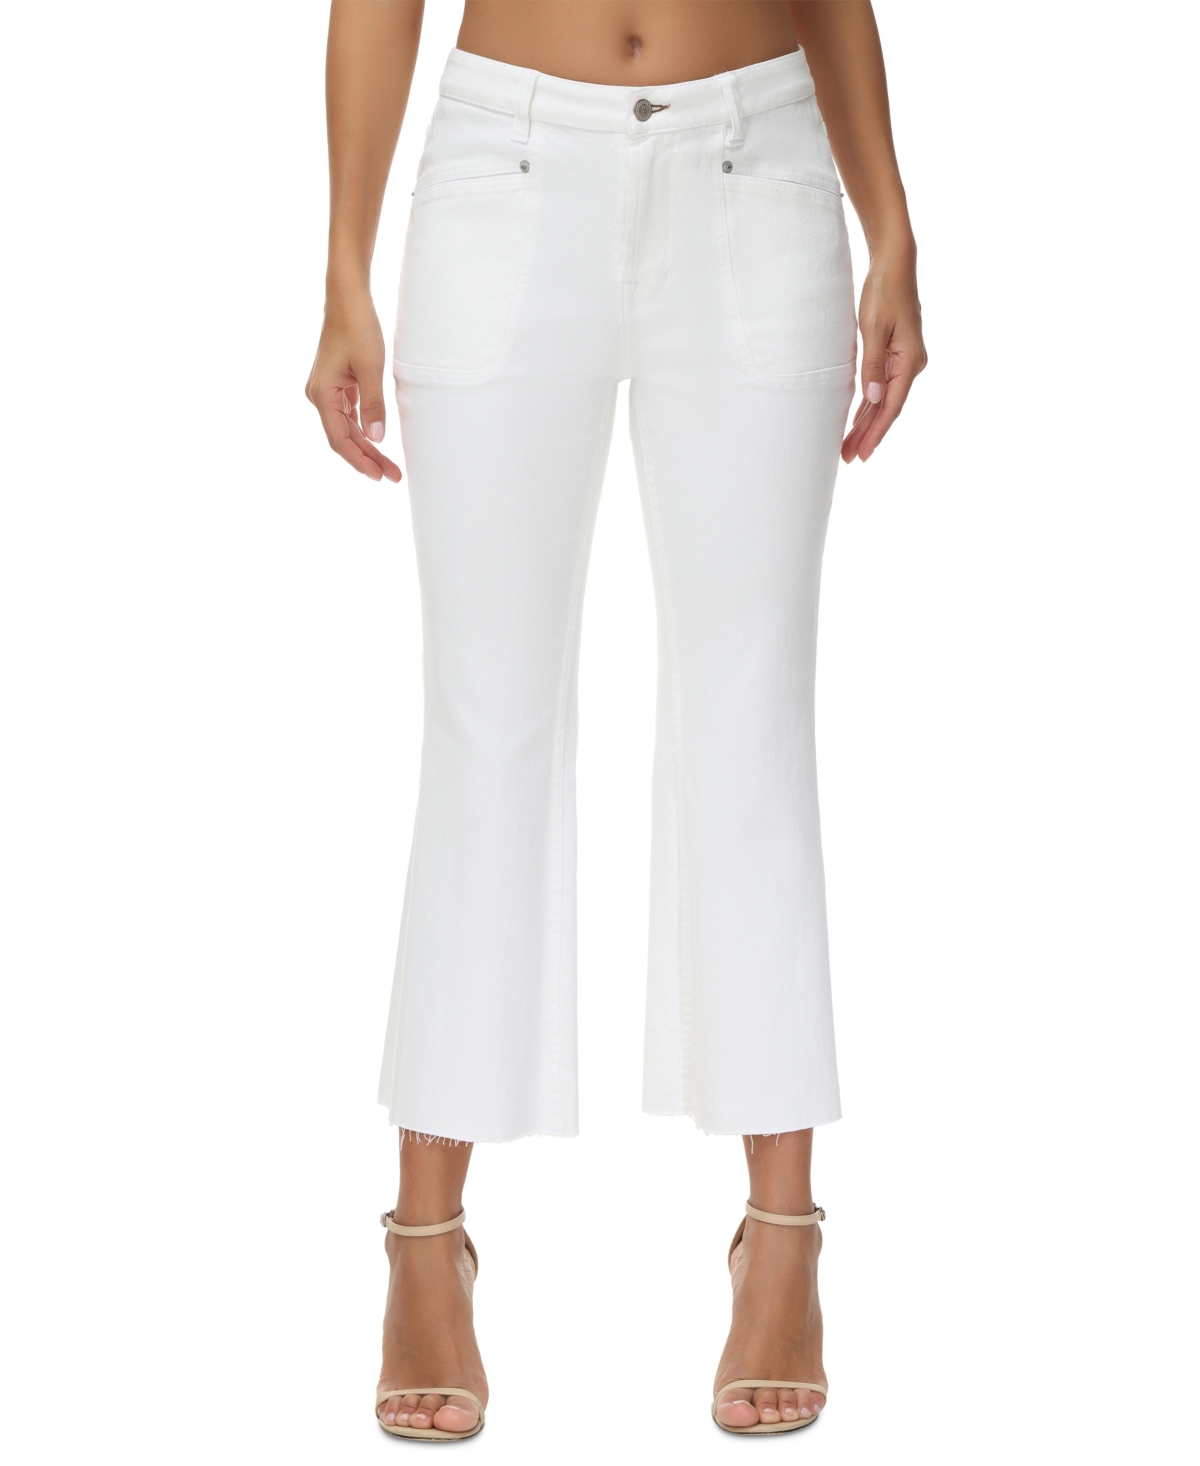 Women's Bootcut Cropped Jeans - Bright White